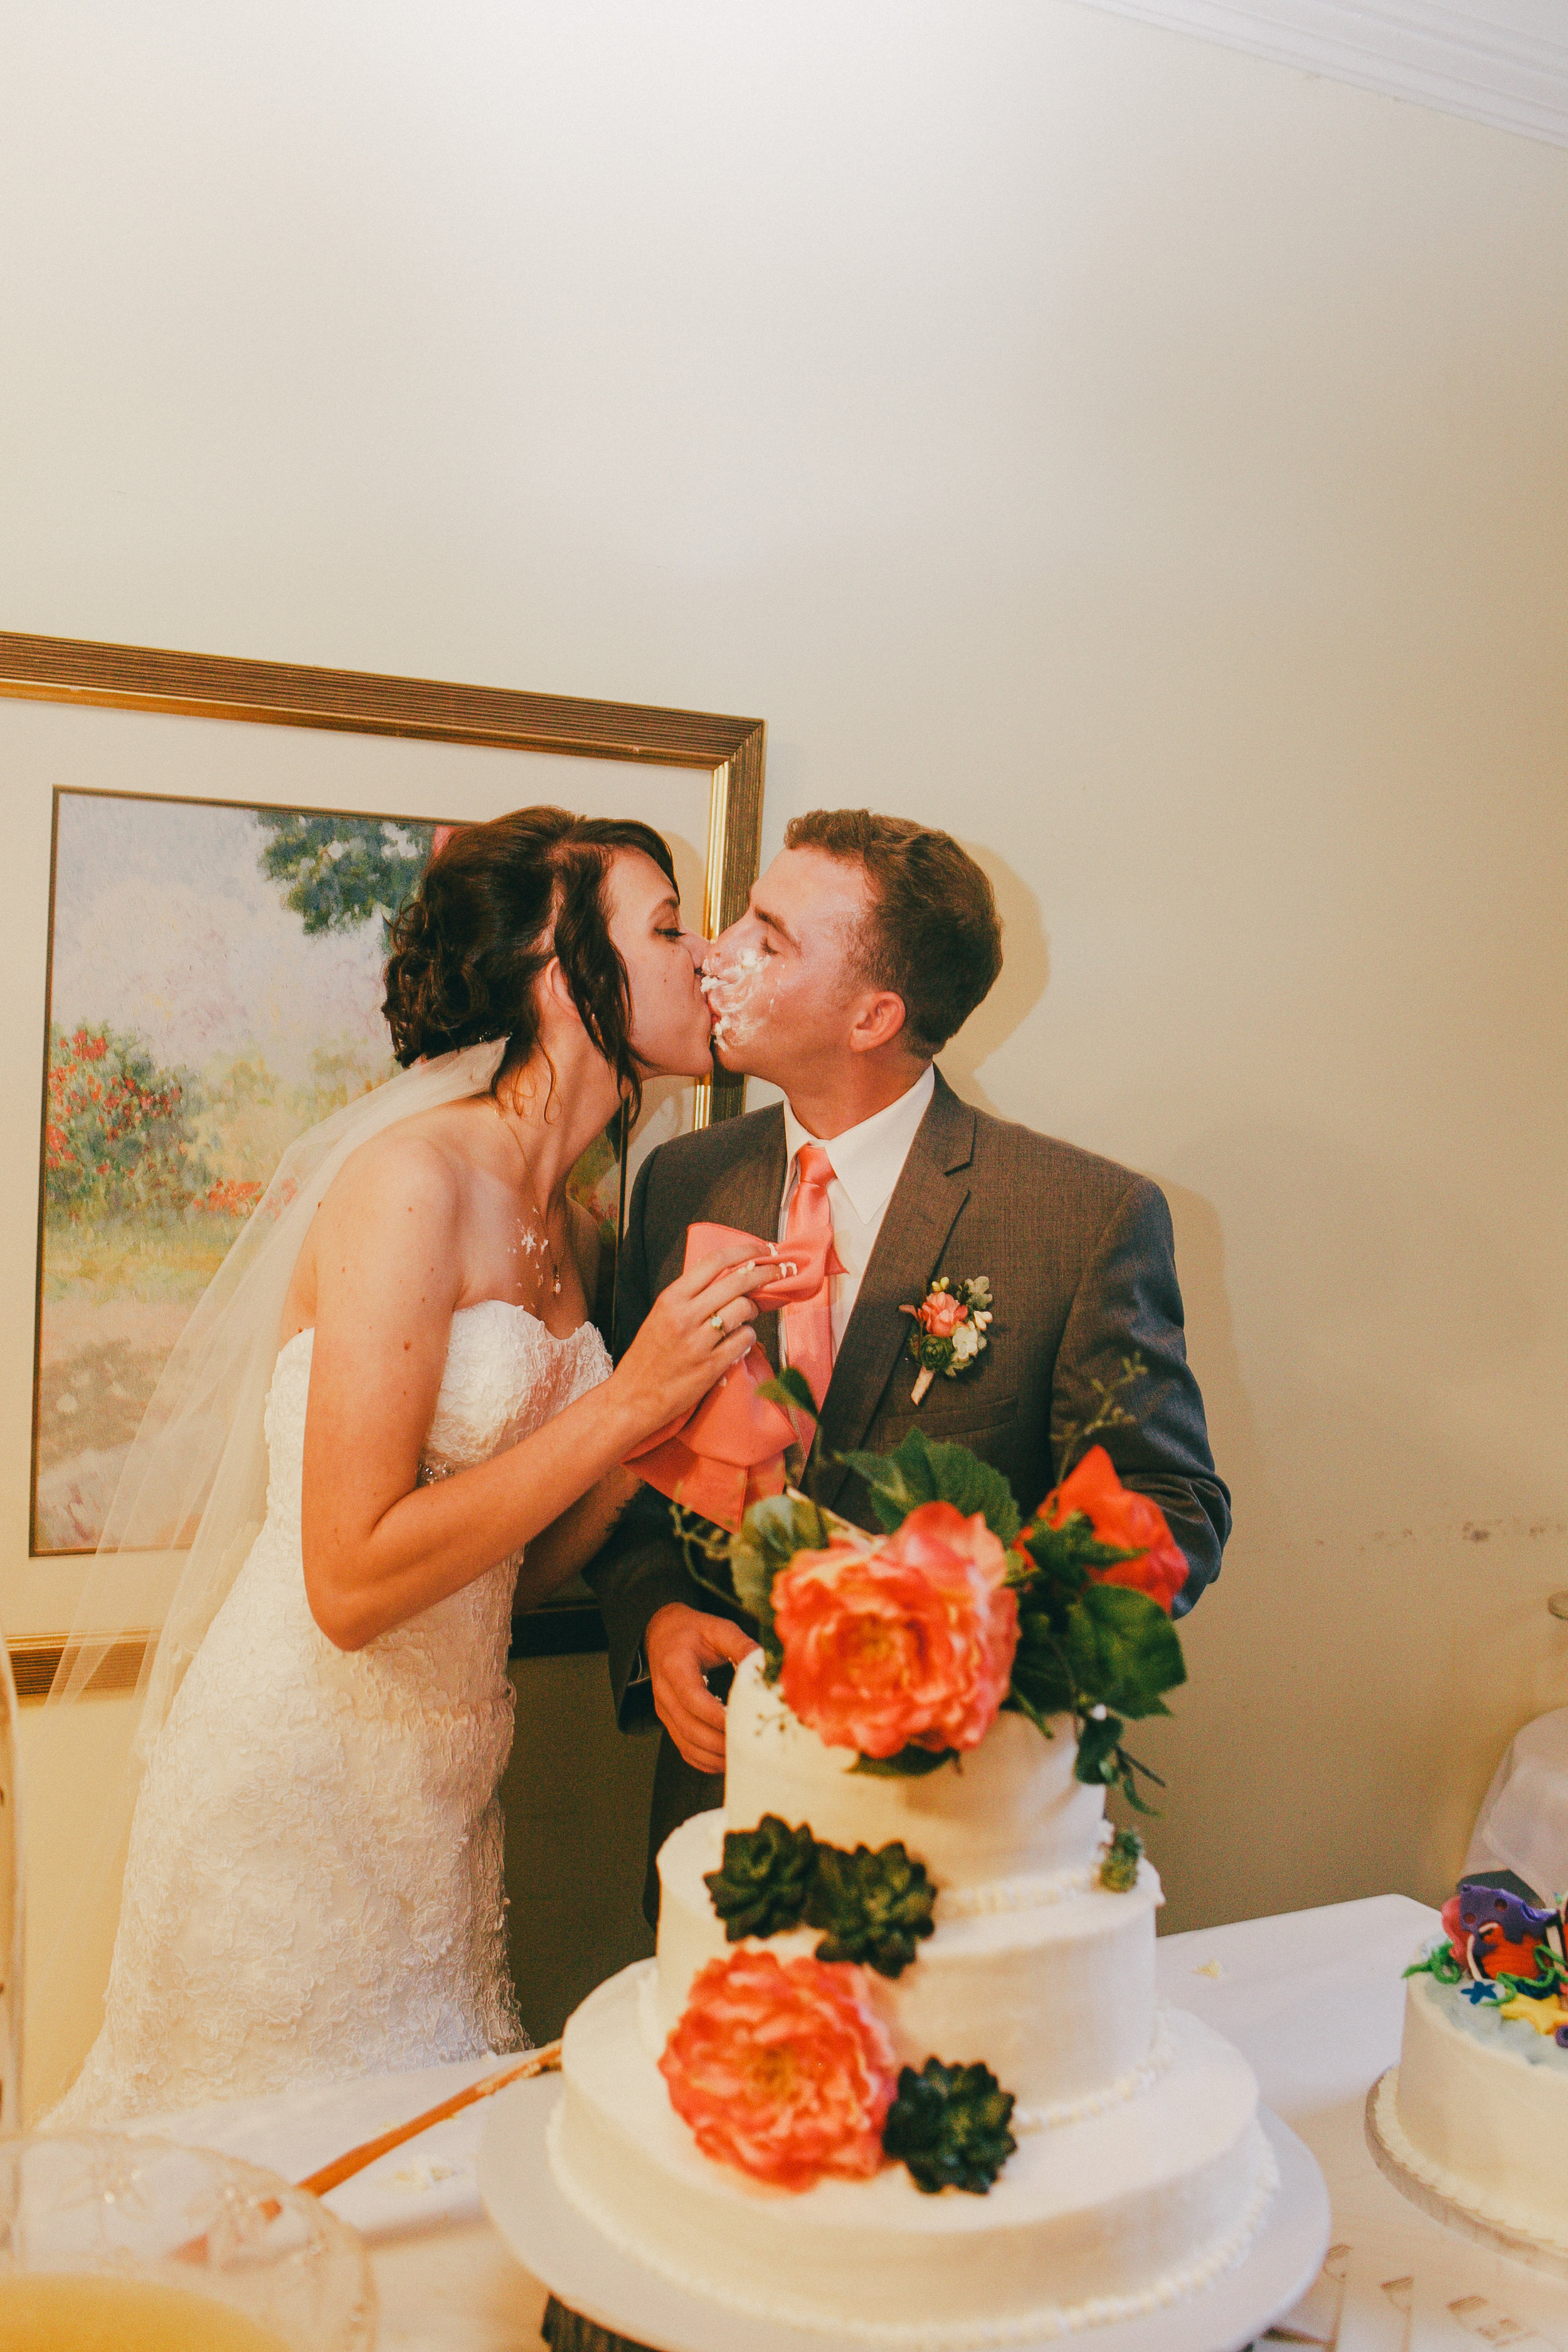 Brooke Summers Photography | My Wedding Photography Investment